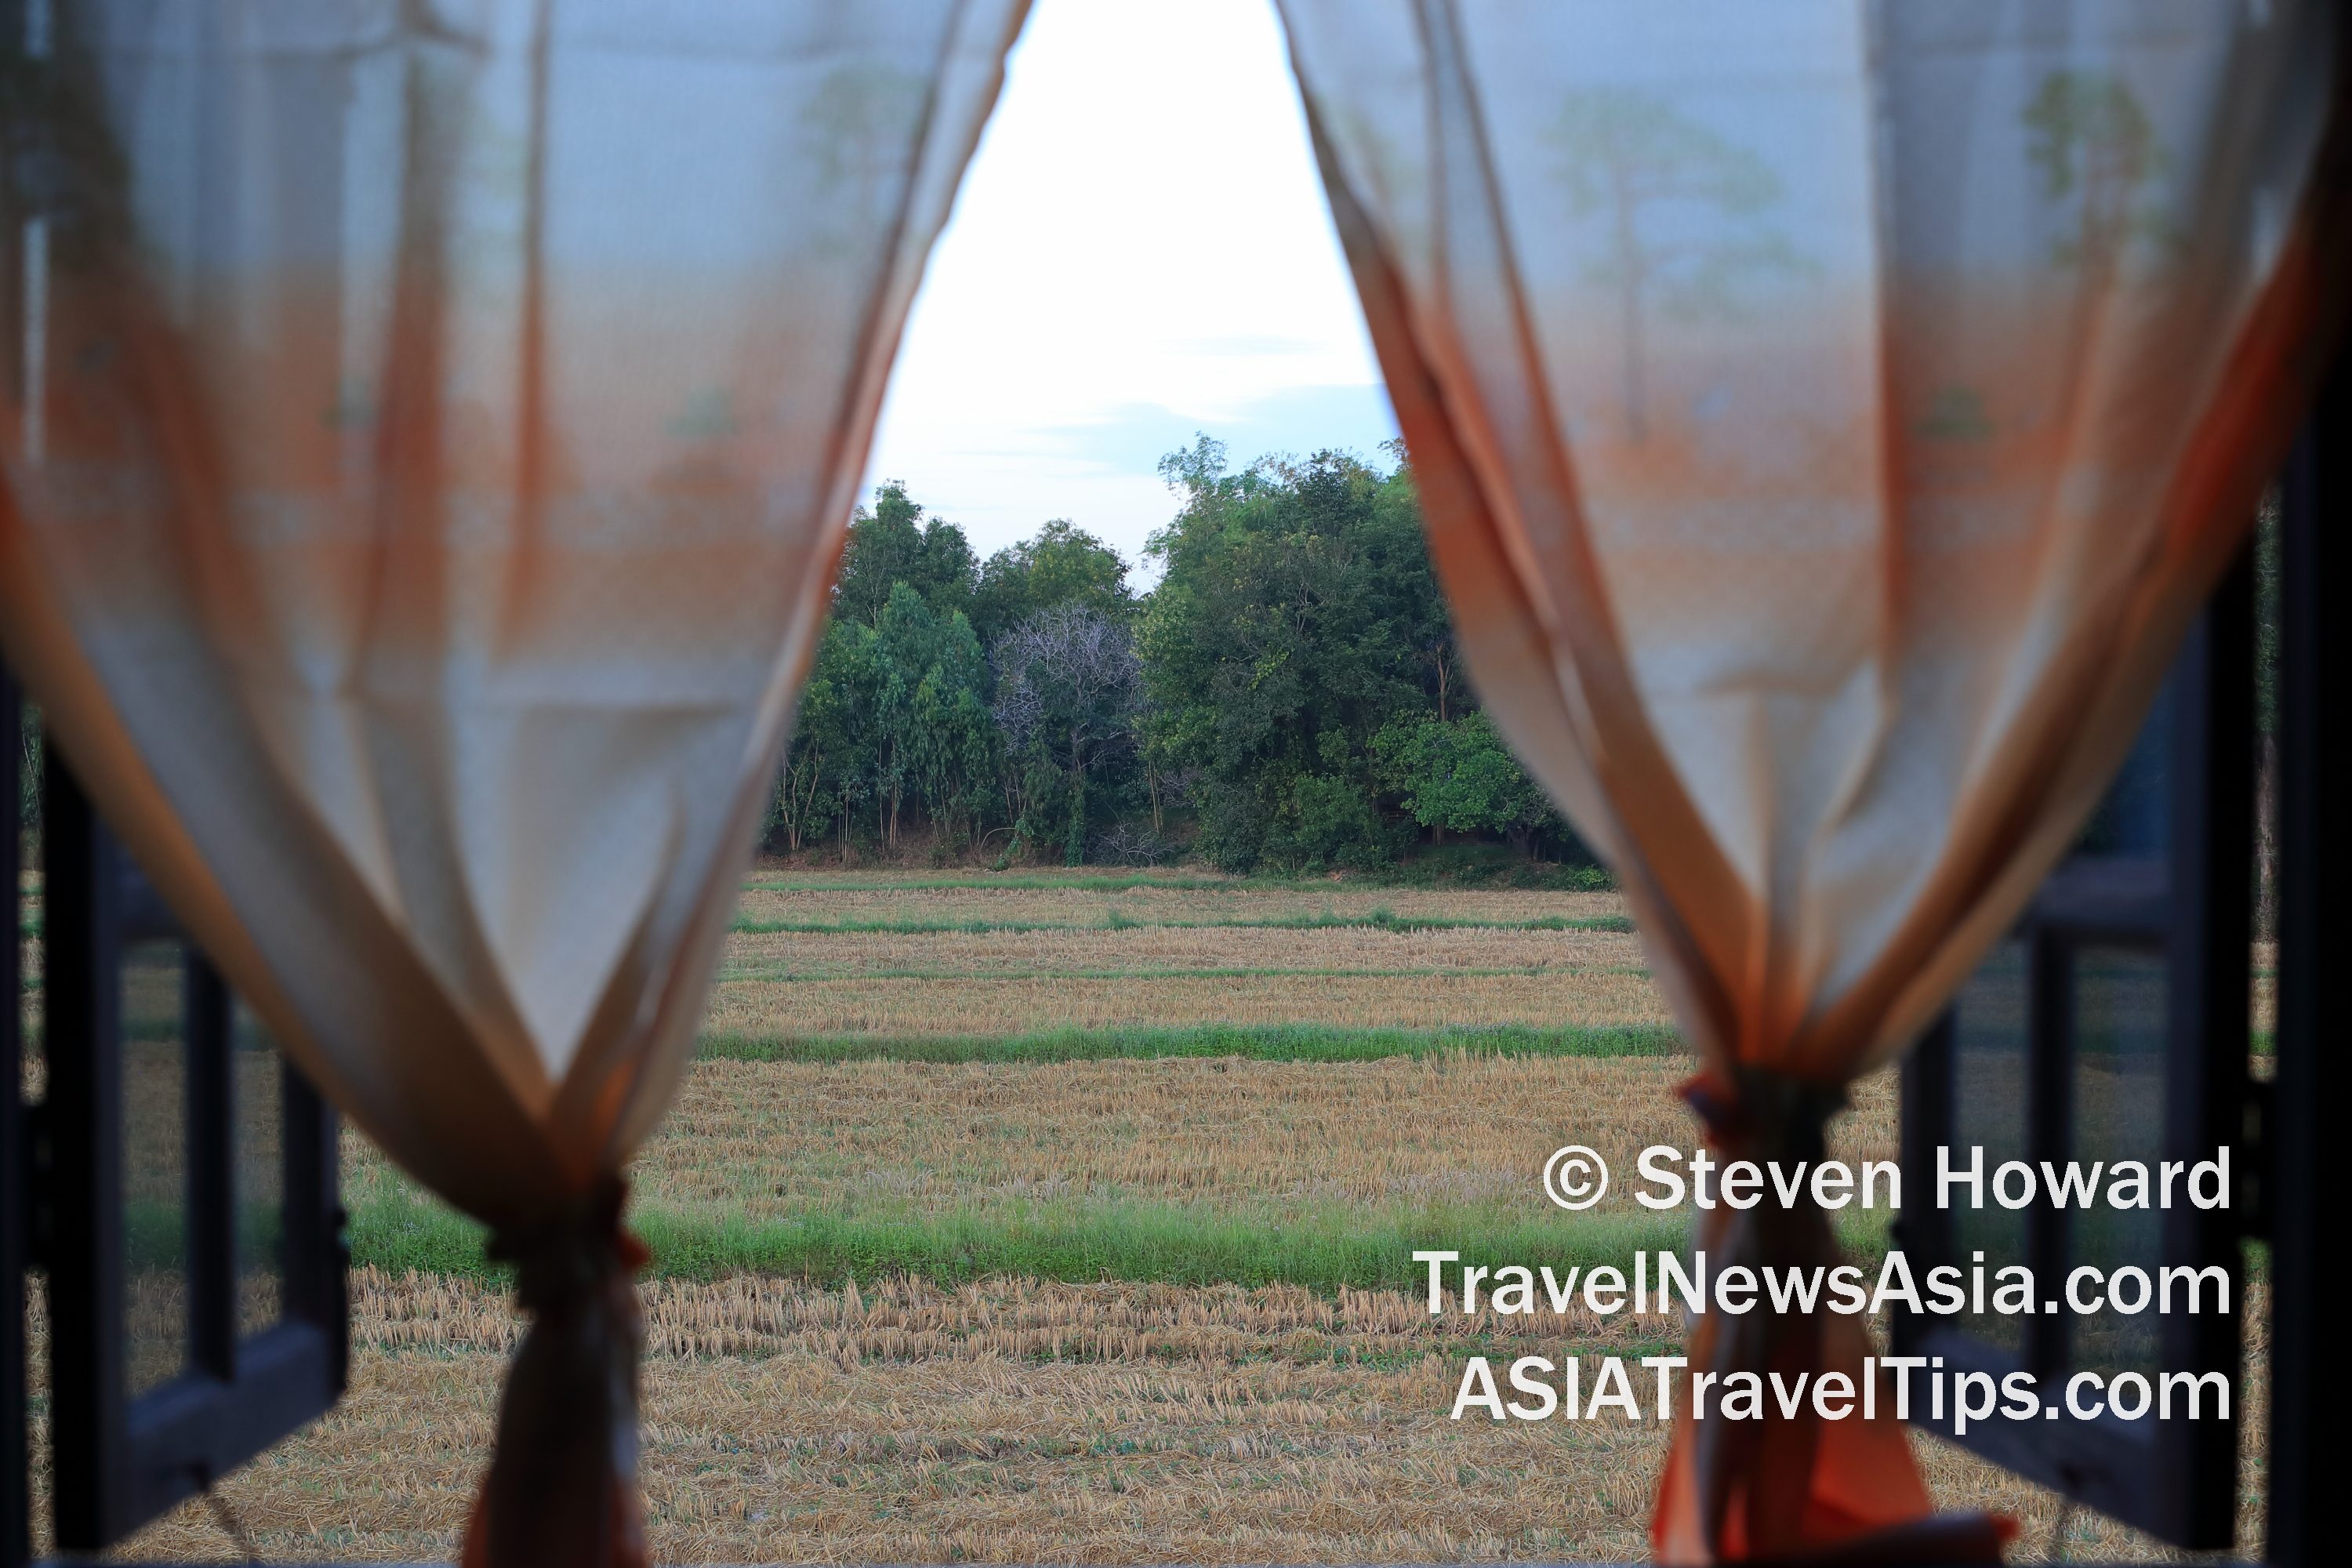 View from a homestay in Sisaket, Thailand. Picture by Steven Howard of TravelNewsAsia.com Click to enlarge.